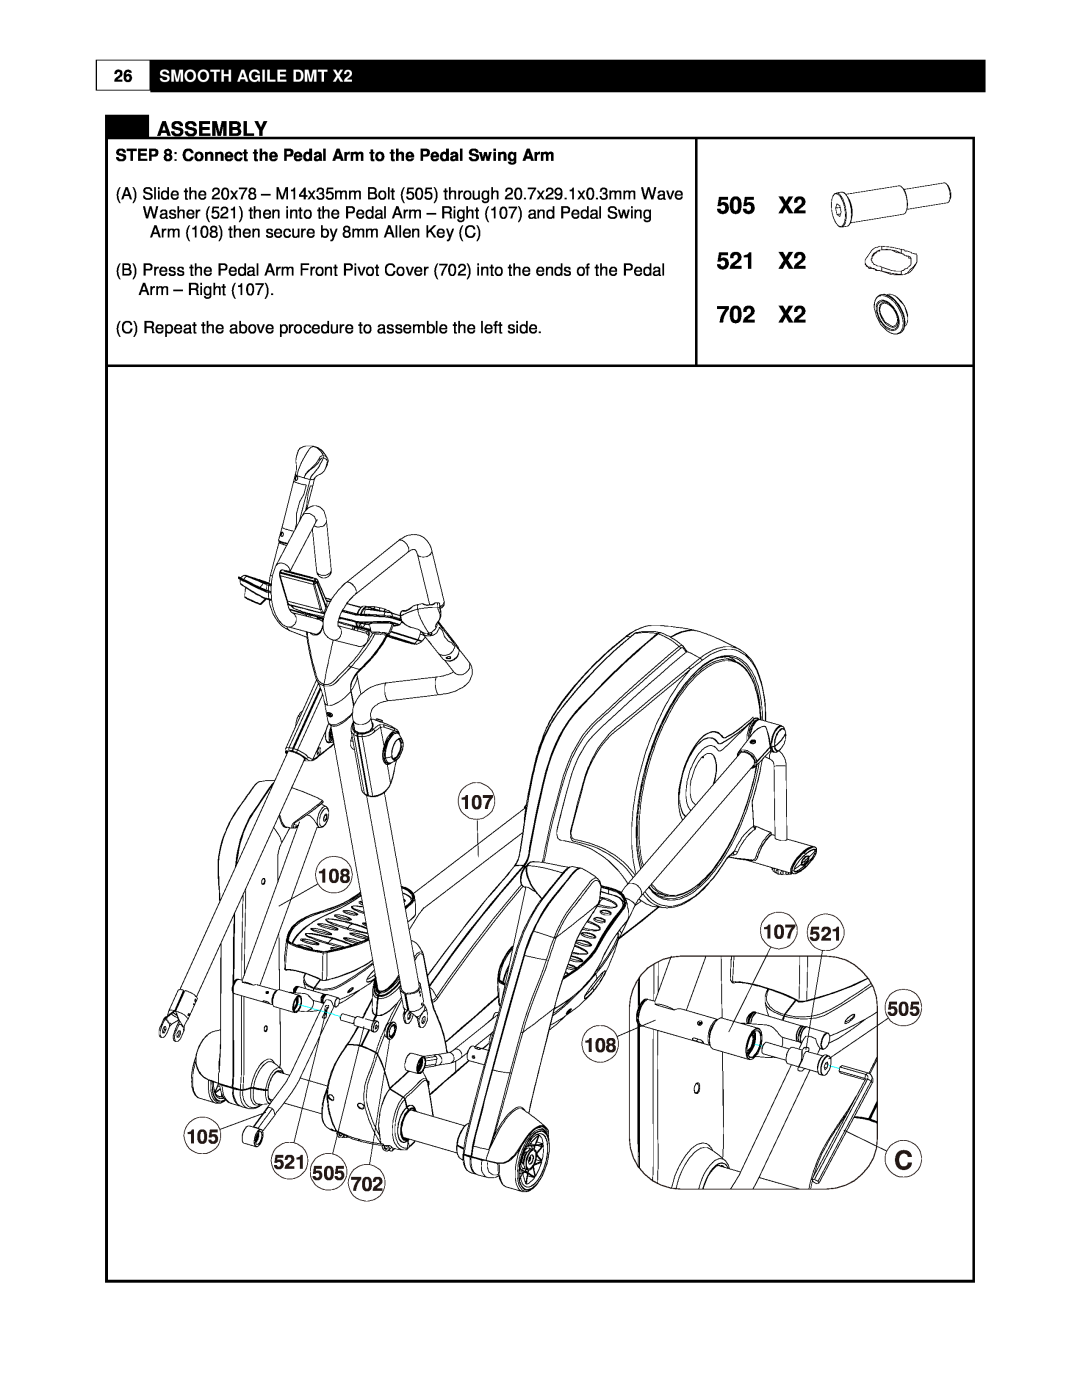 Smooth Fitness DMT X2 user manual 505 521 702, Assembly, Smooth Agile Dmt, Connect the Pedal Arm to the Pedal Swing Arm 